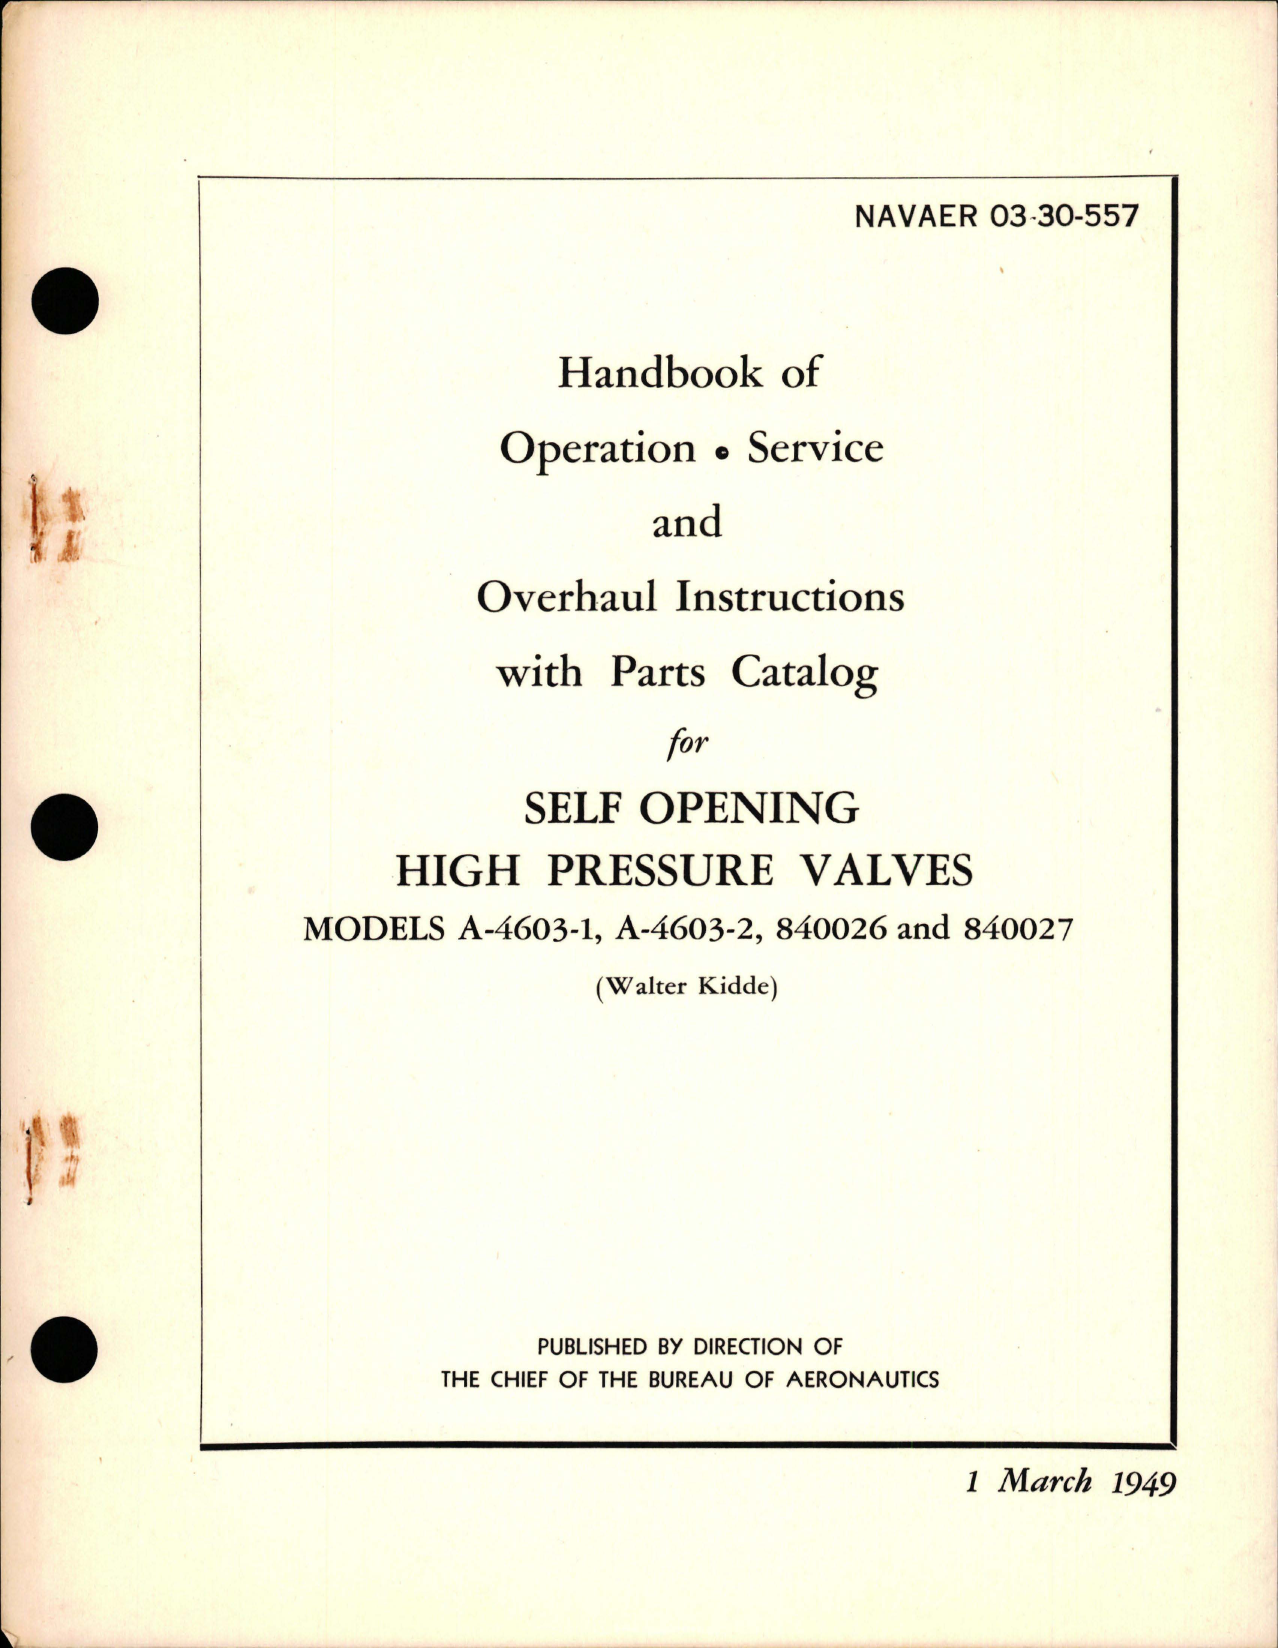 Sample page 1 from AirCorps Library document: Operation, Service and Overhaul Instructions with Parts Catalog for Self Opening High Pressure Valves